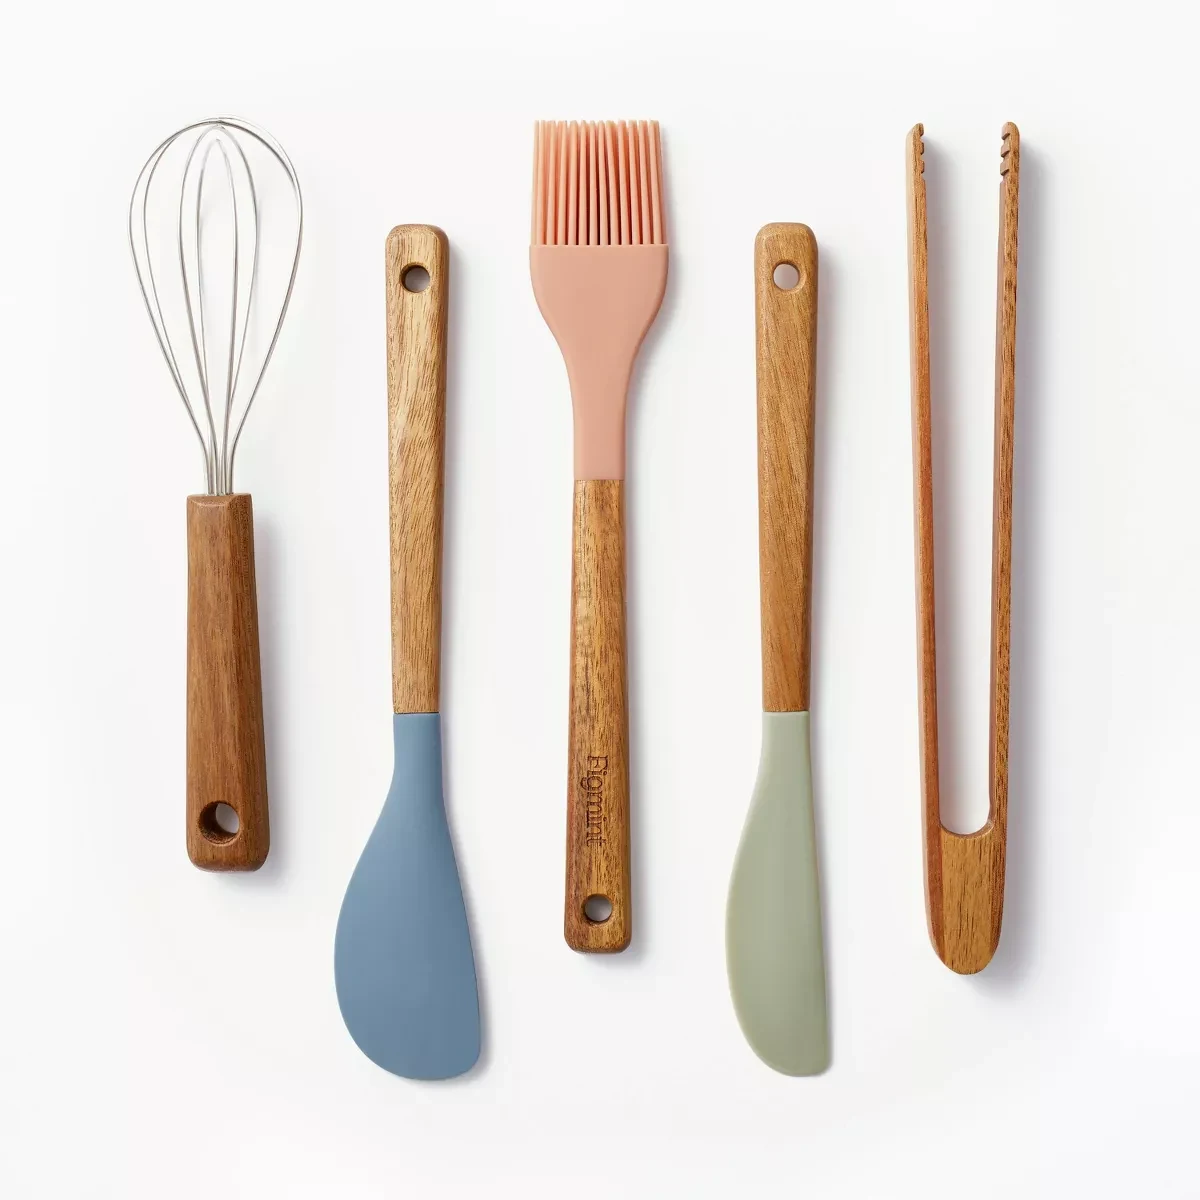 Target Launching Figmint Private Label Kitchenware